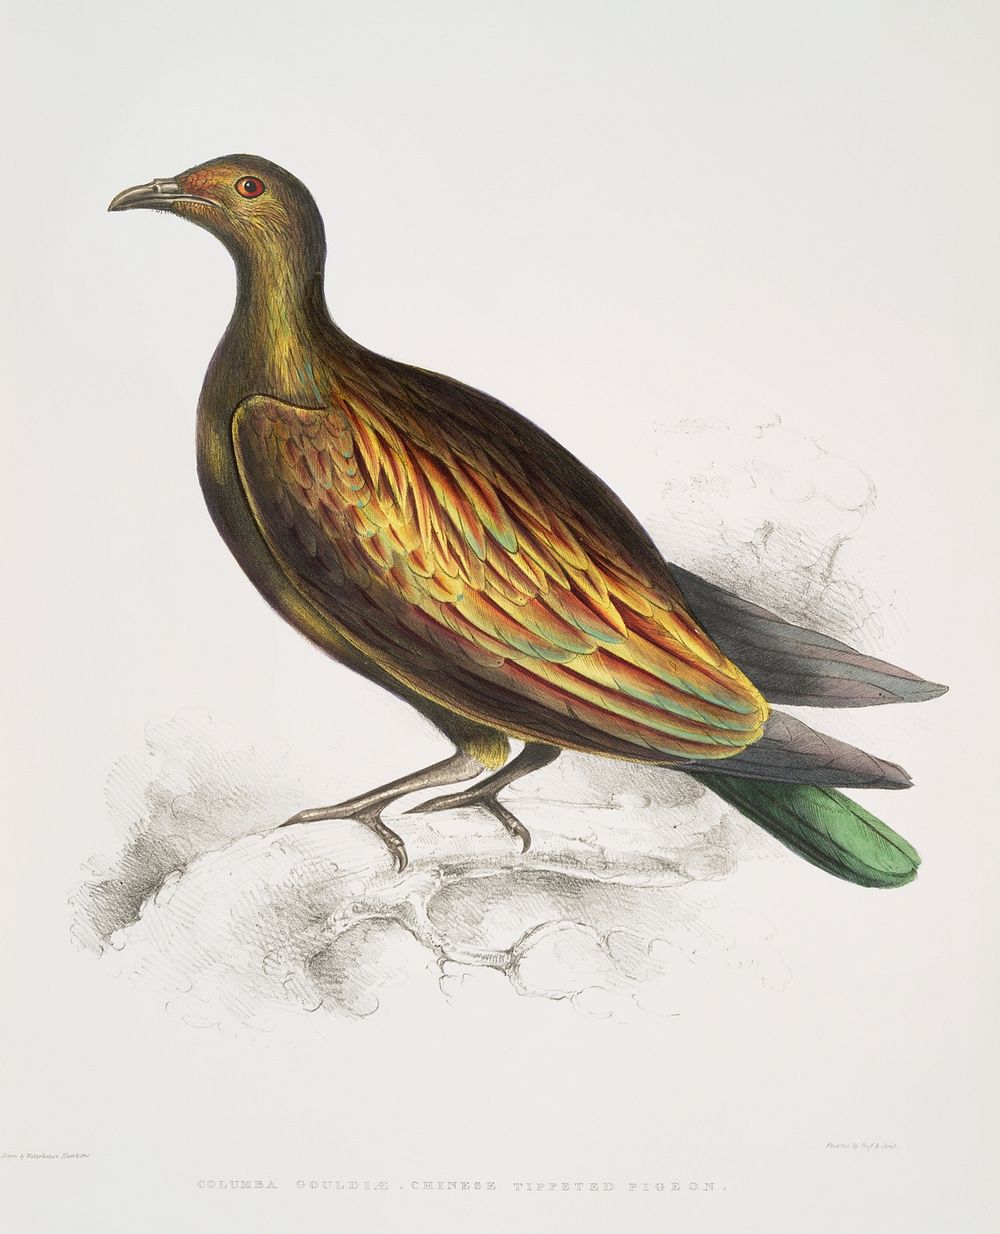 Chinese Tippeted Pigeon (Columba Gouldioe) from Illustrations of Indian zoology (1830-1834) by John Edward Gray (1800-1875).…